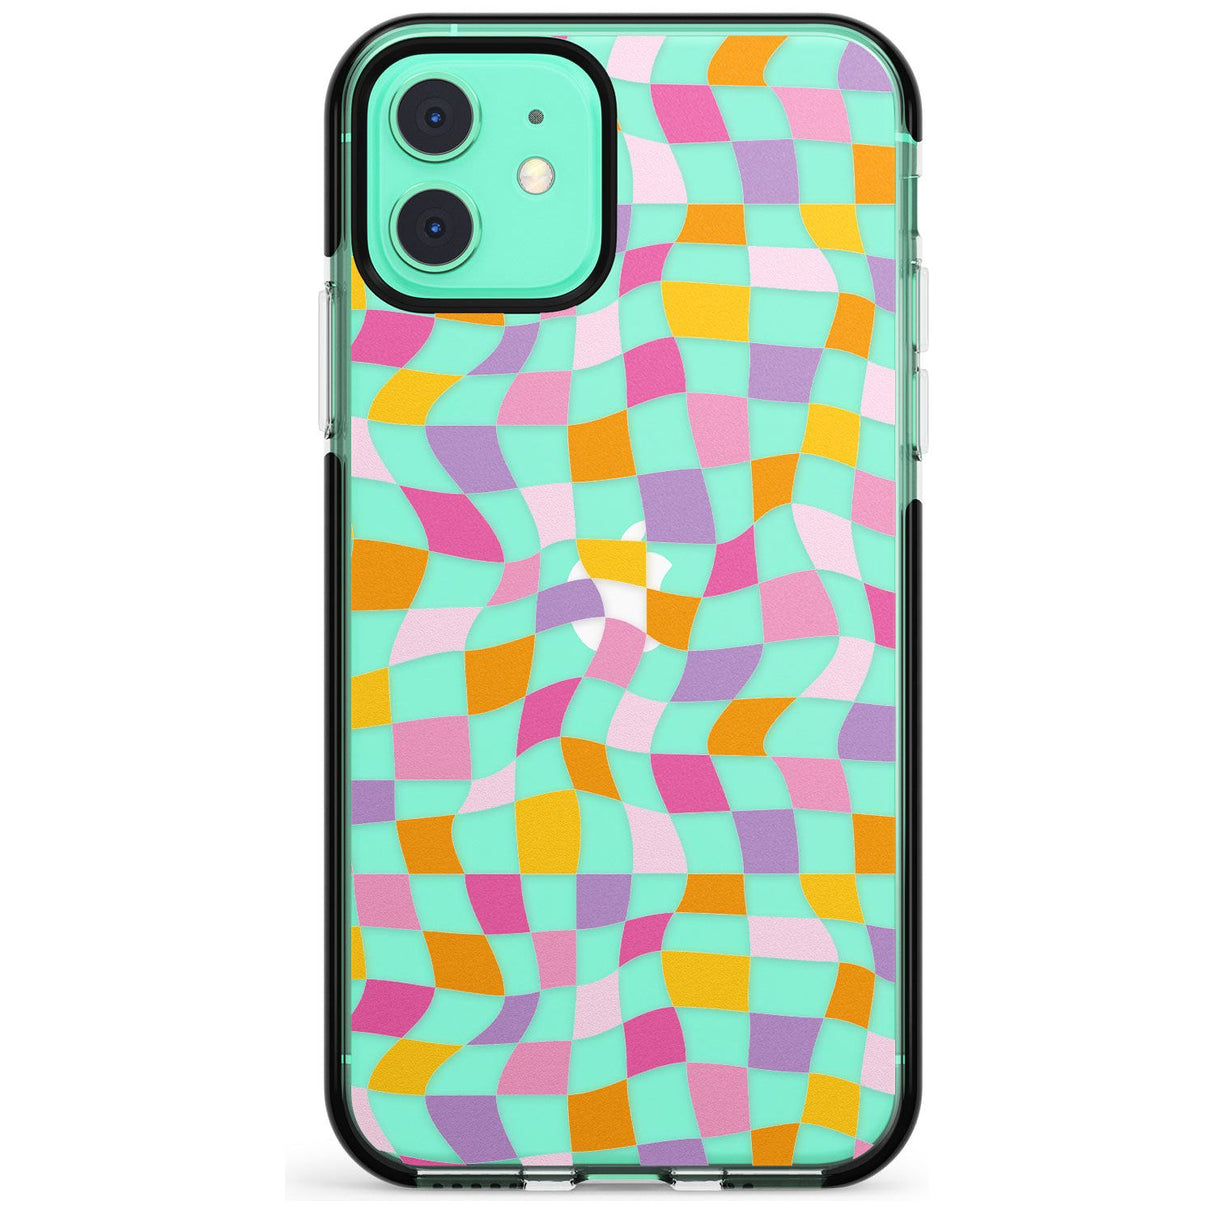 Wonky Squares Pattern Black Impact Phone Case for iPhone 11 Pro Max